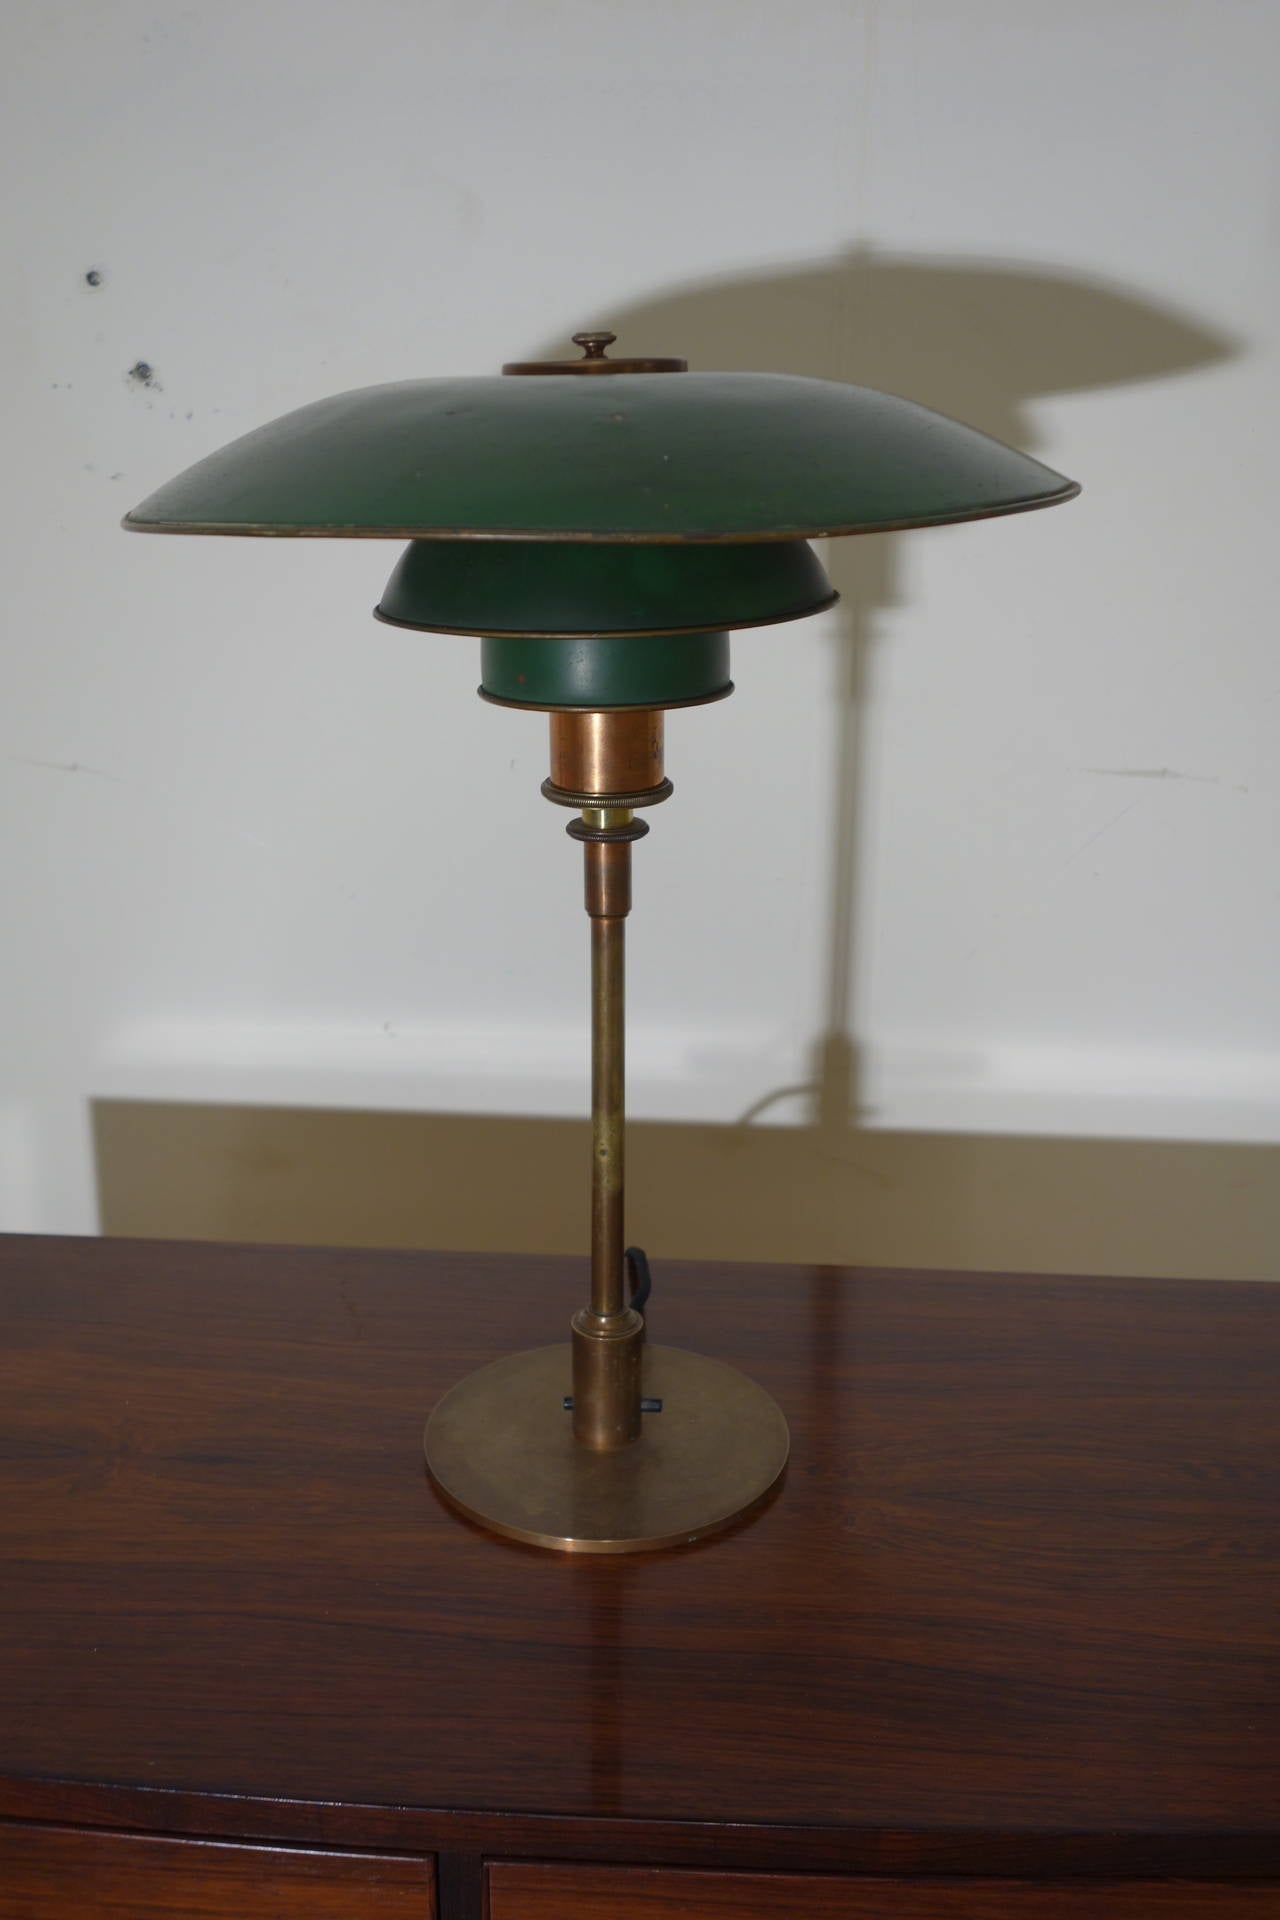 20th Century Poul Henningsen PH 4/3 Desk Lamp with Green Copper Shades